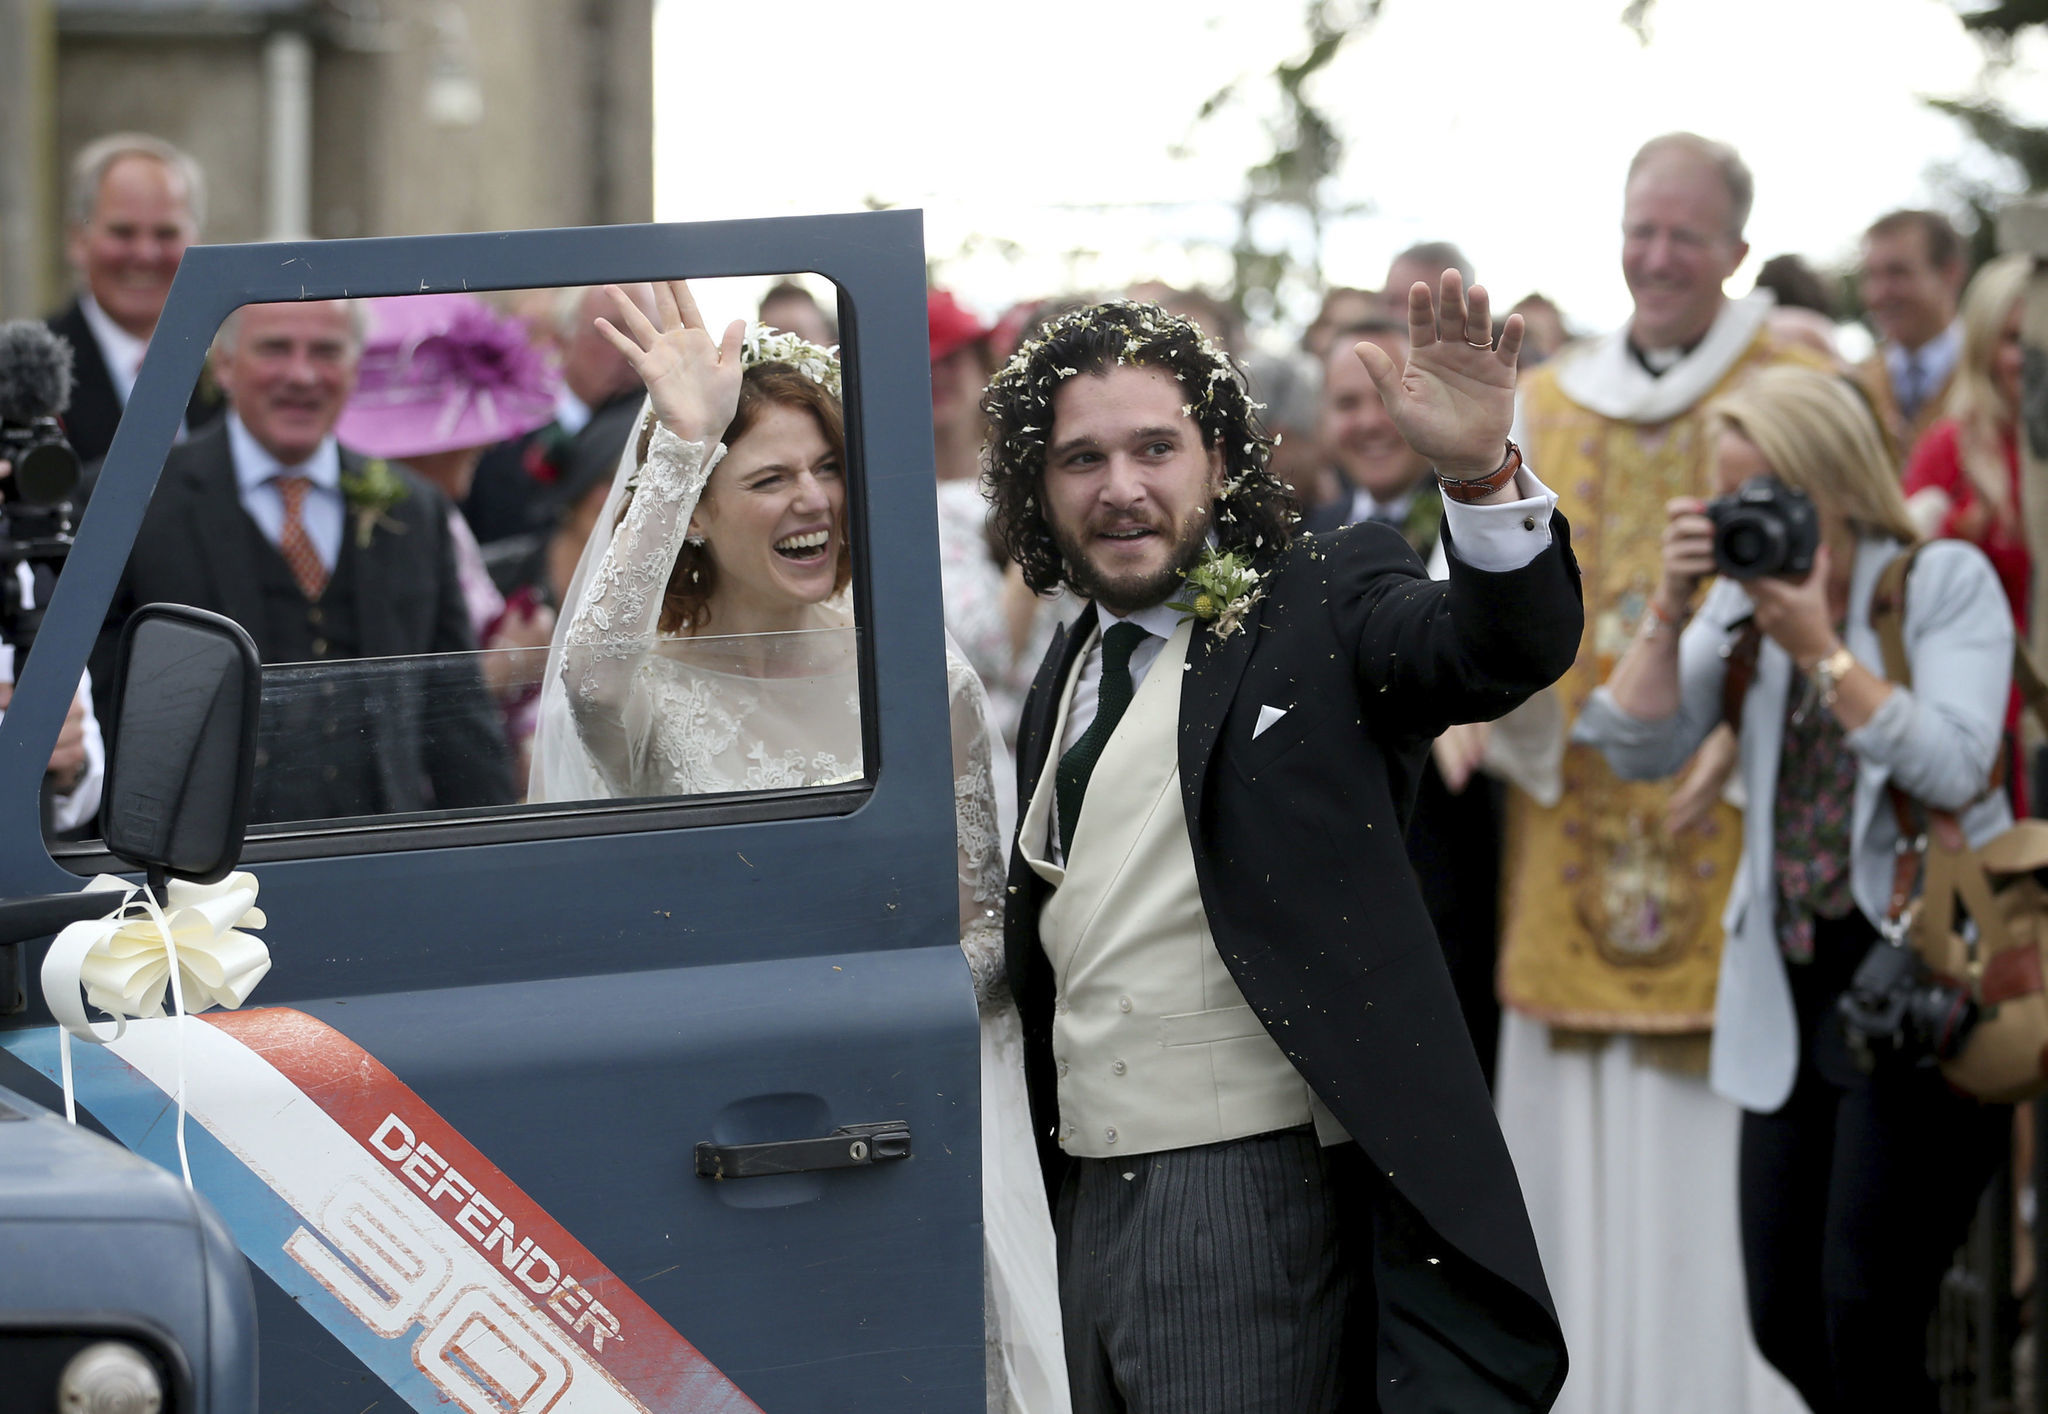 For once, a happy 'Game of Thrones' wedding: co-stars Kit Harington and Rose Leslie ...